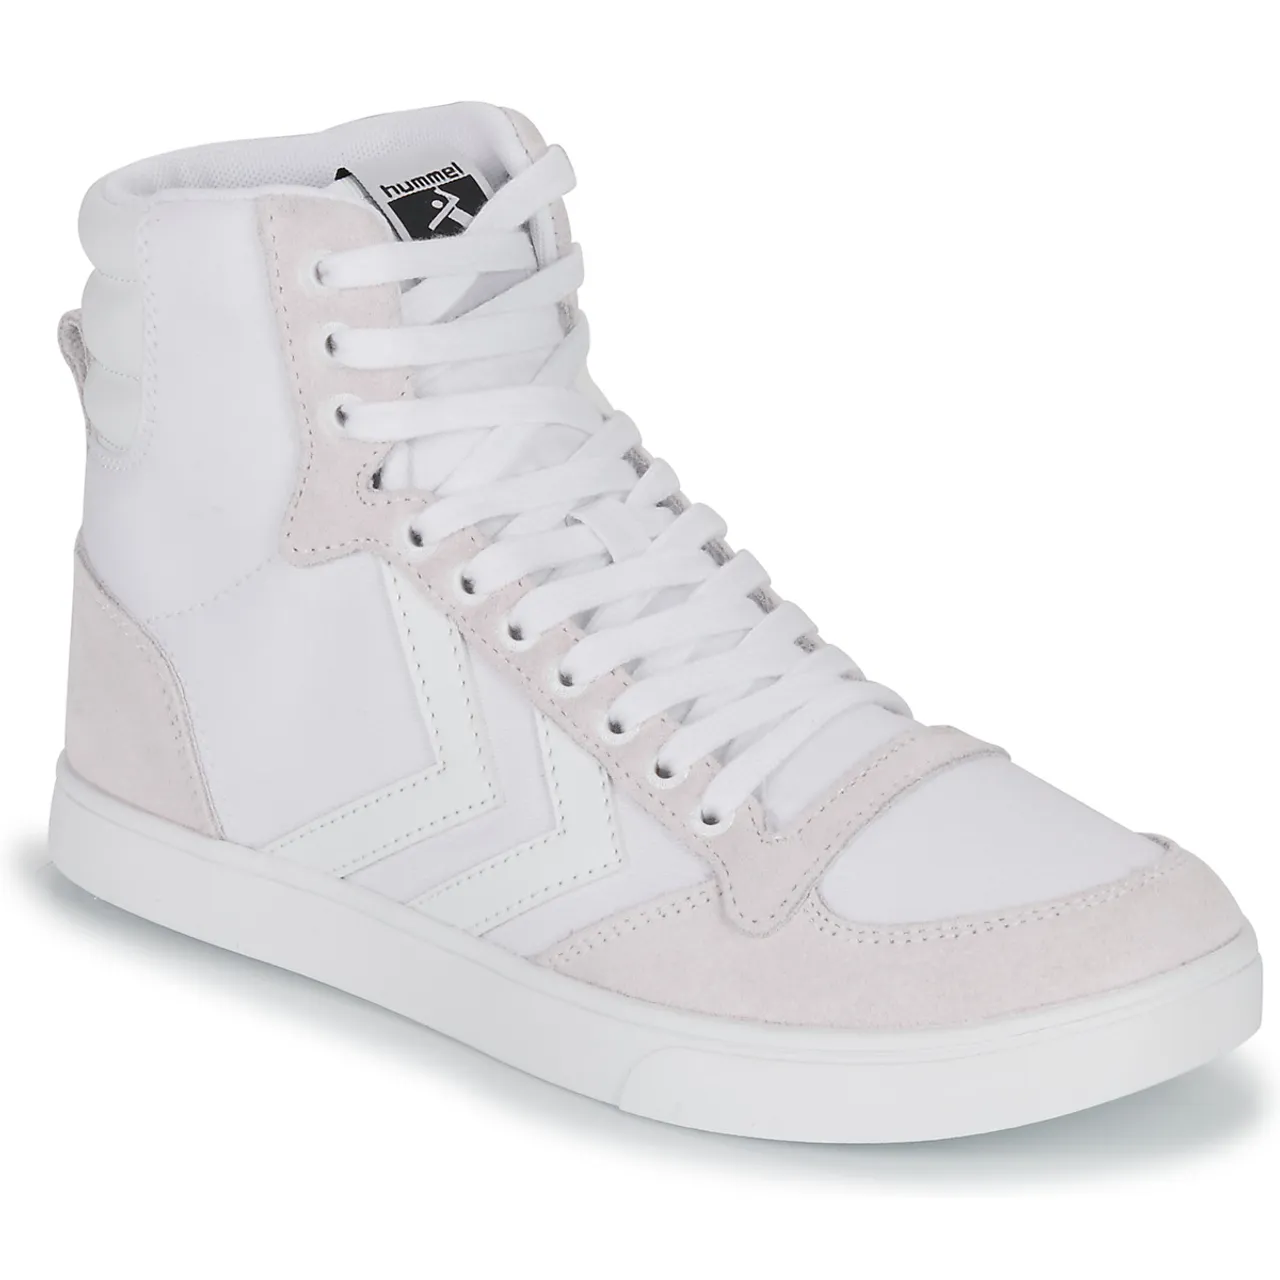 hummel  SLIMMER STADIL TONAL HIGH  women's Shoes (High-top Trainers) in White